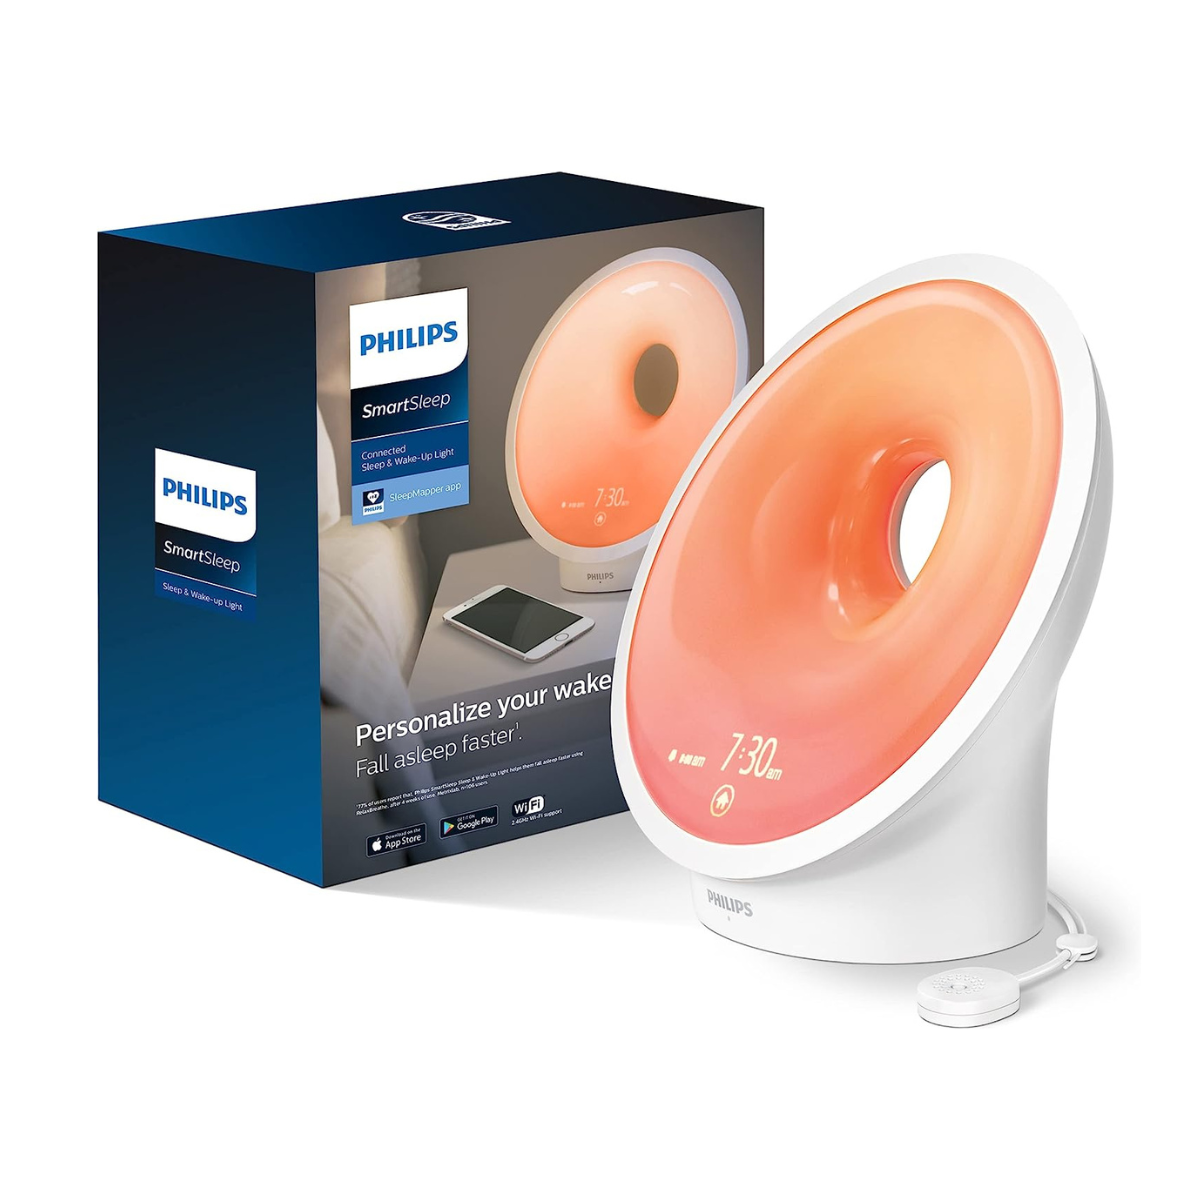 The Philips SmartSleep Connected Sleep and Wake-Up Light with box on white background